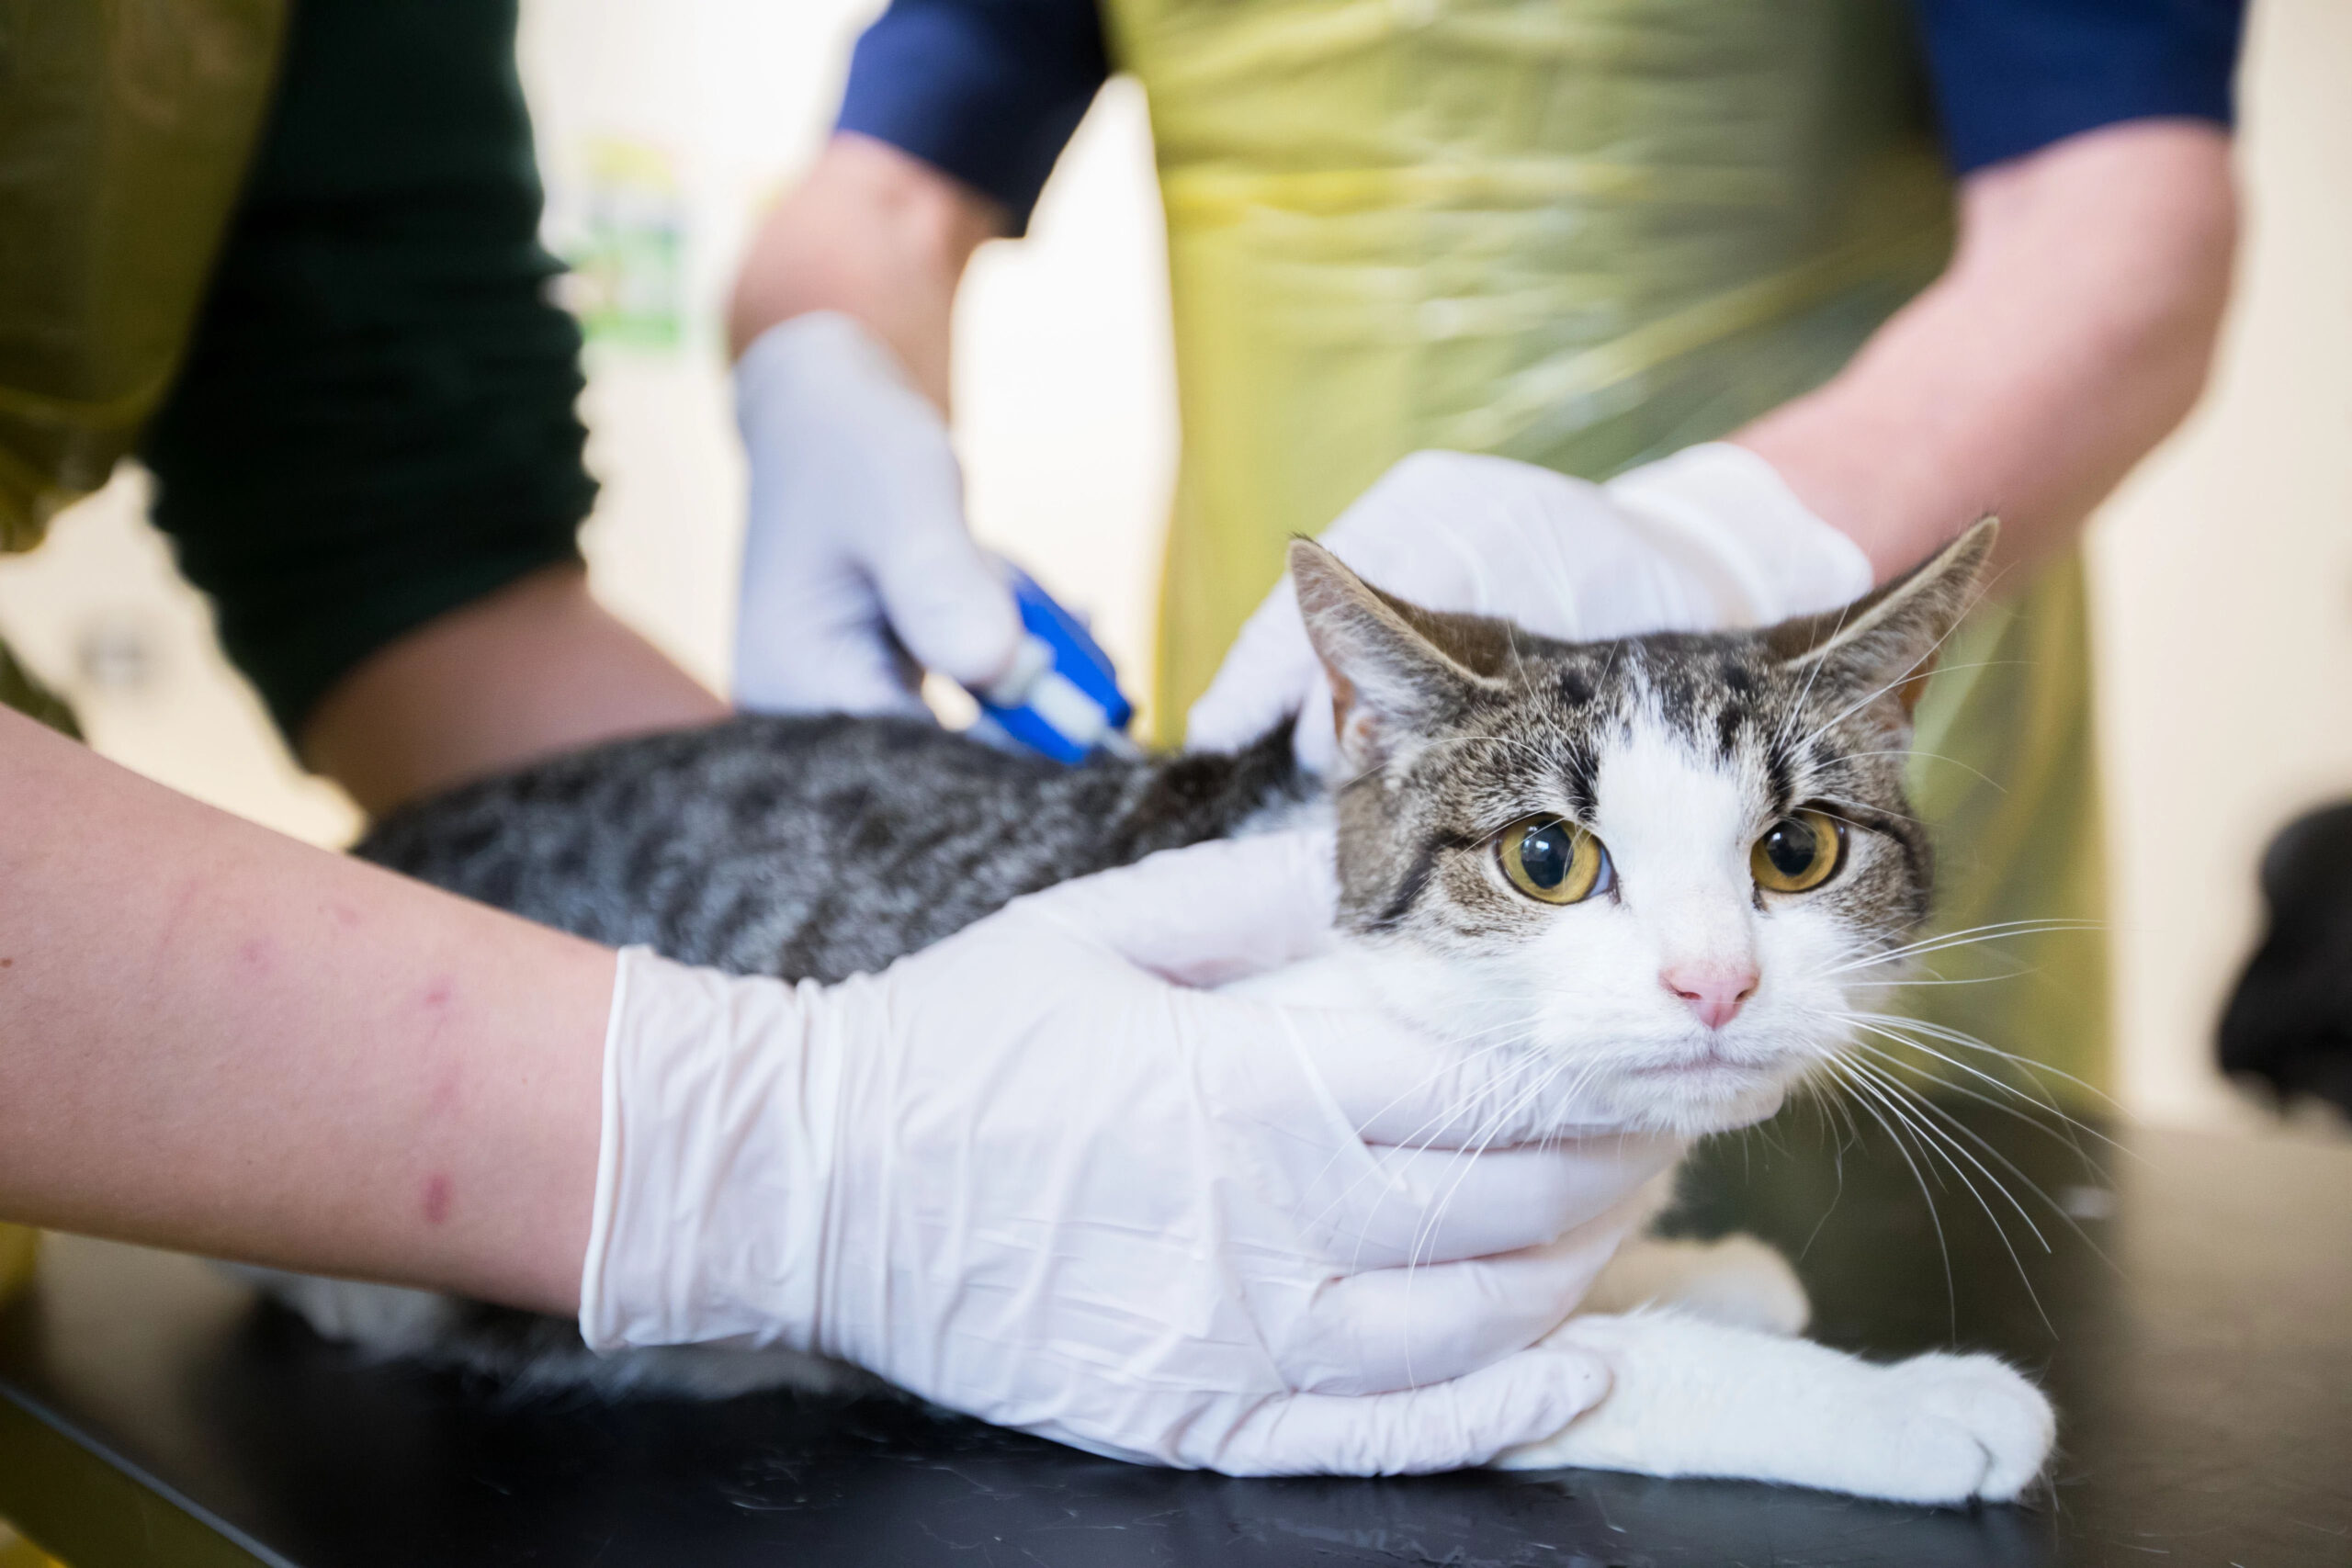 New Compulsory Microchipping Law for Cats but 2.2 Million Still Unchipped